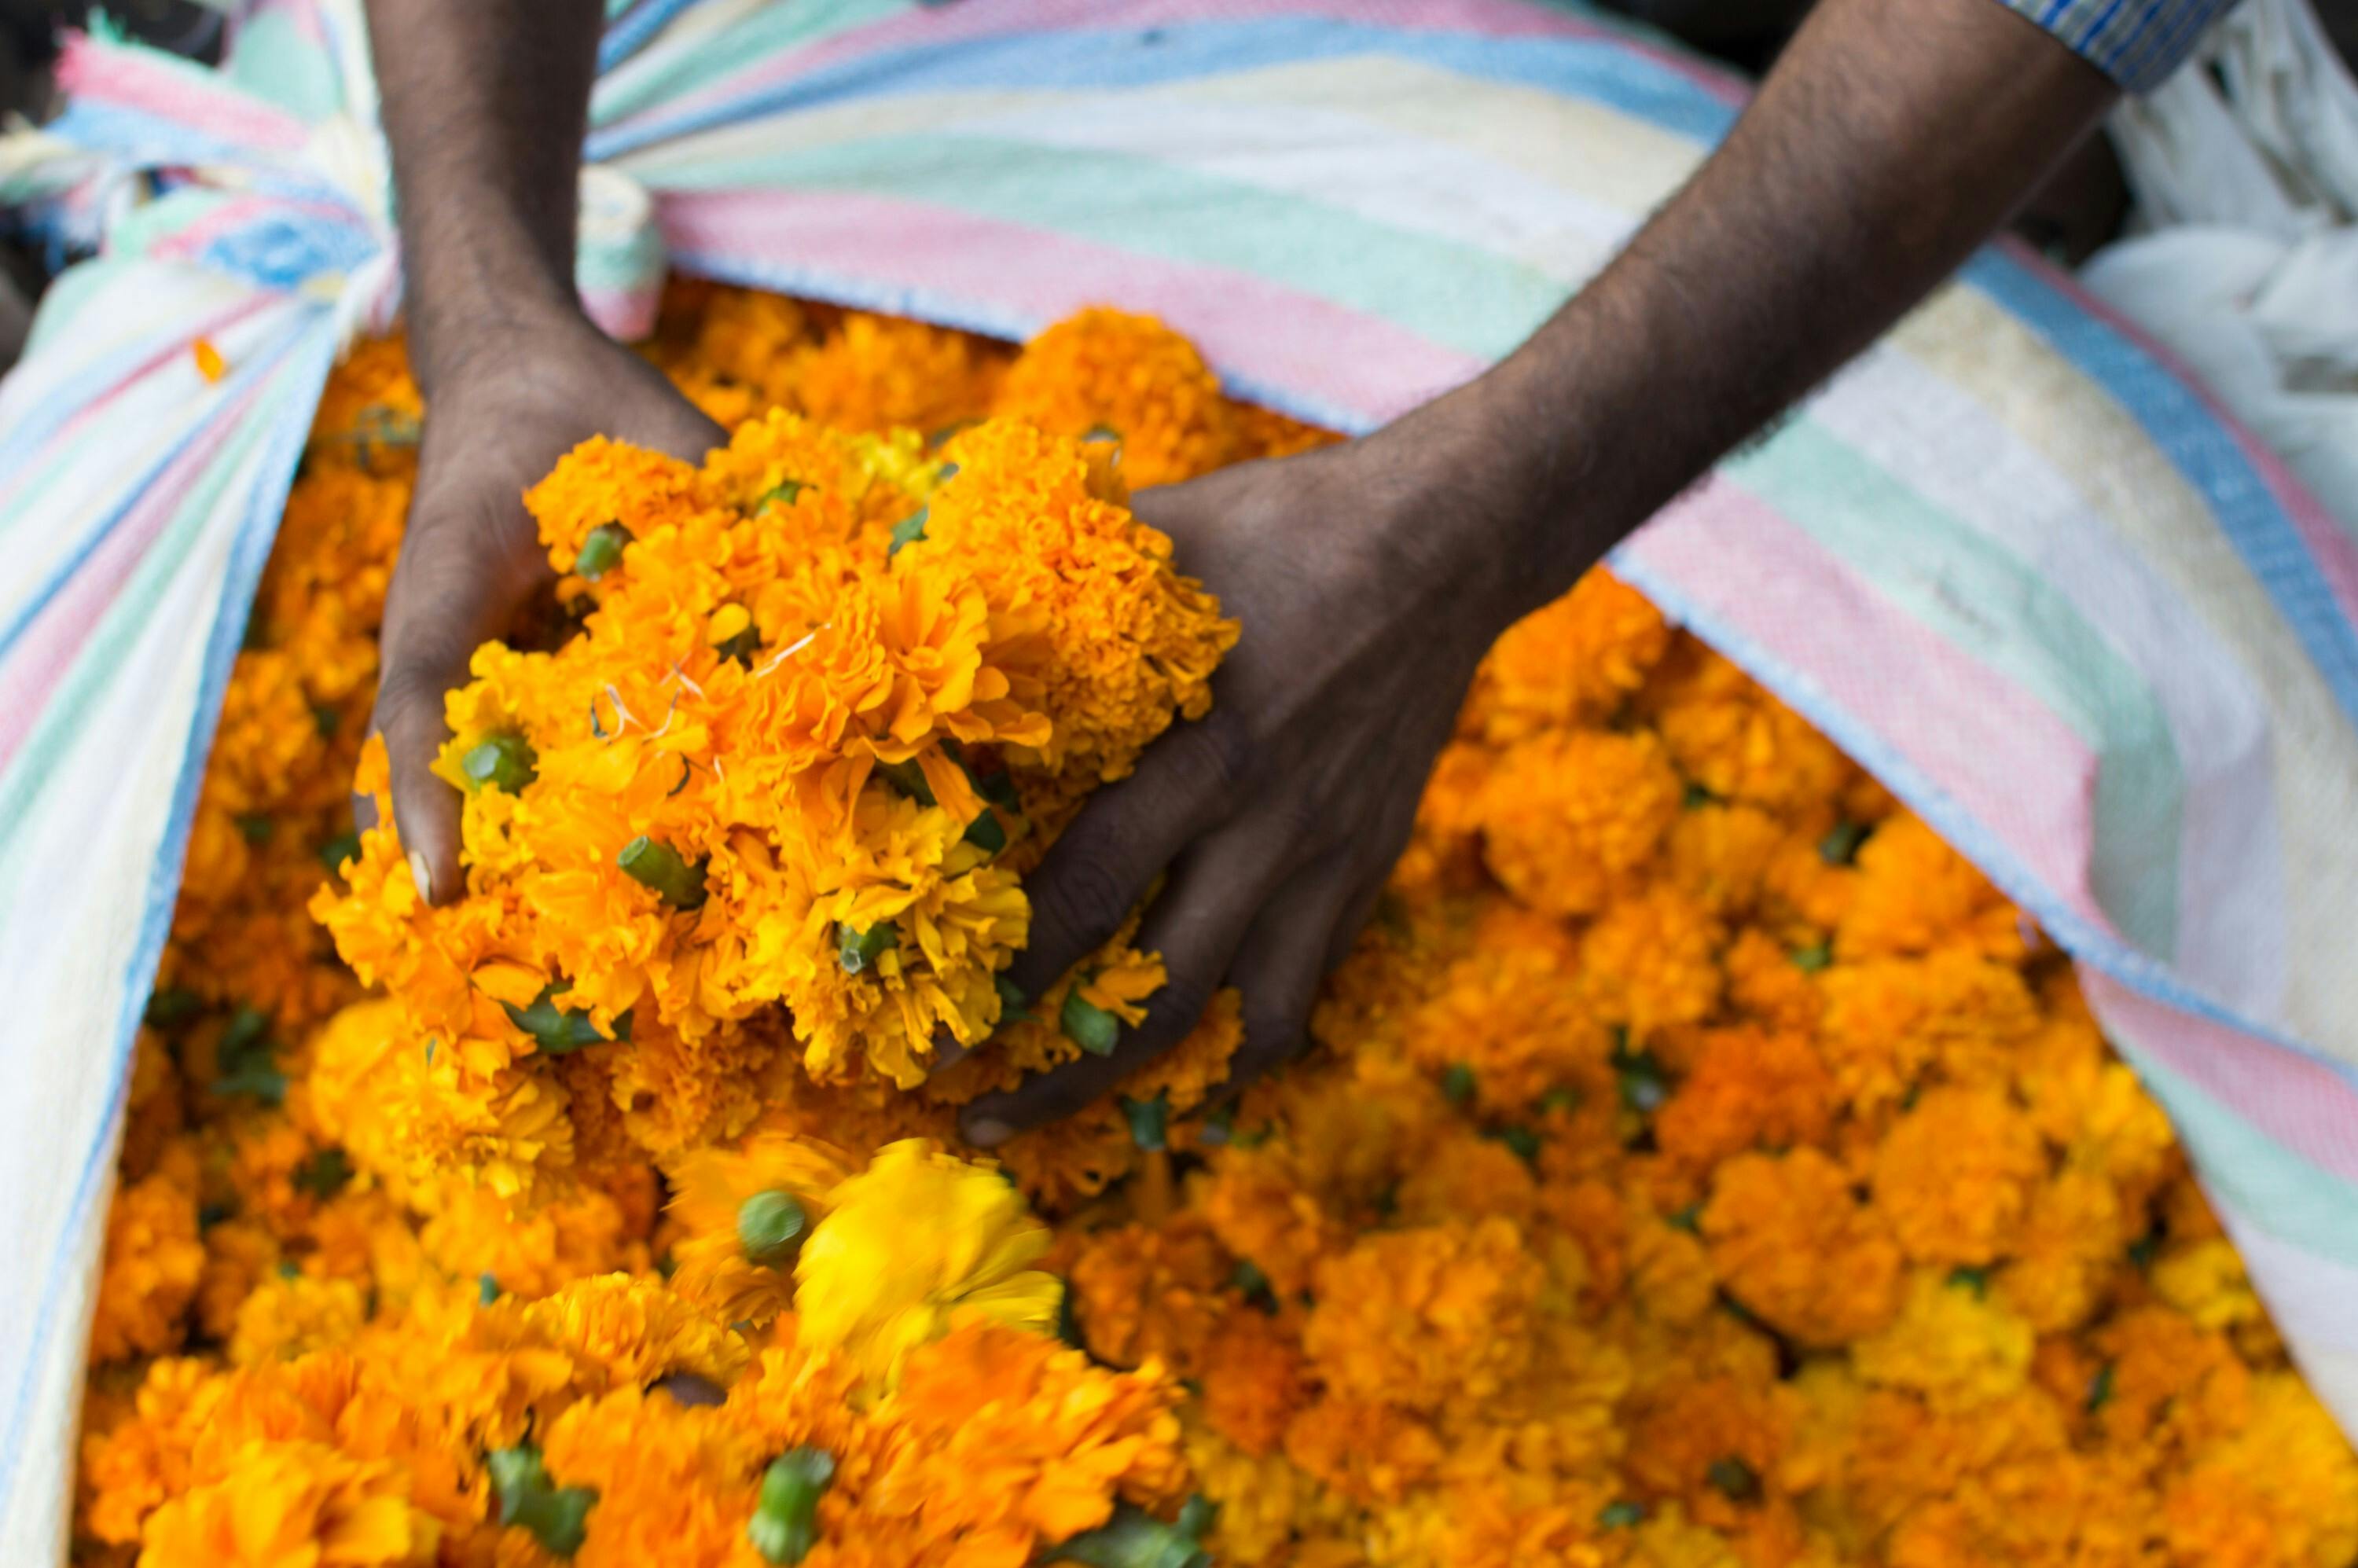 Marigolds at Fatehpuri flowers market in Central Delhi, India (Javed Sultan/Anadolu Agency via Getty Images)